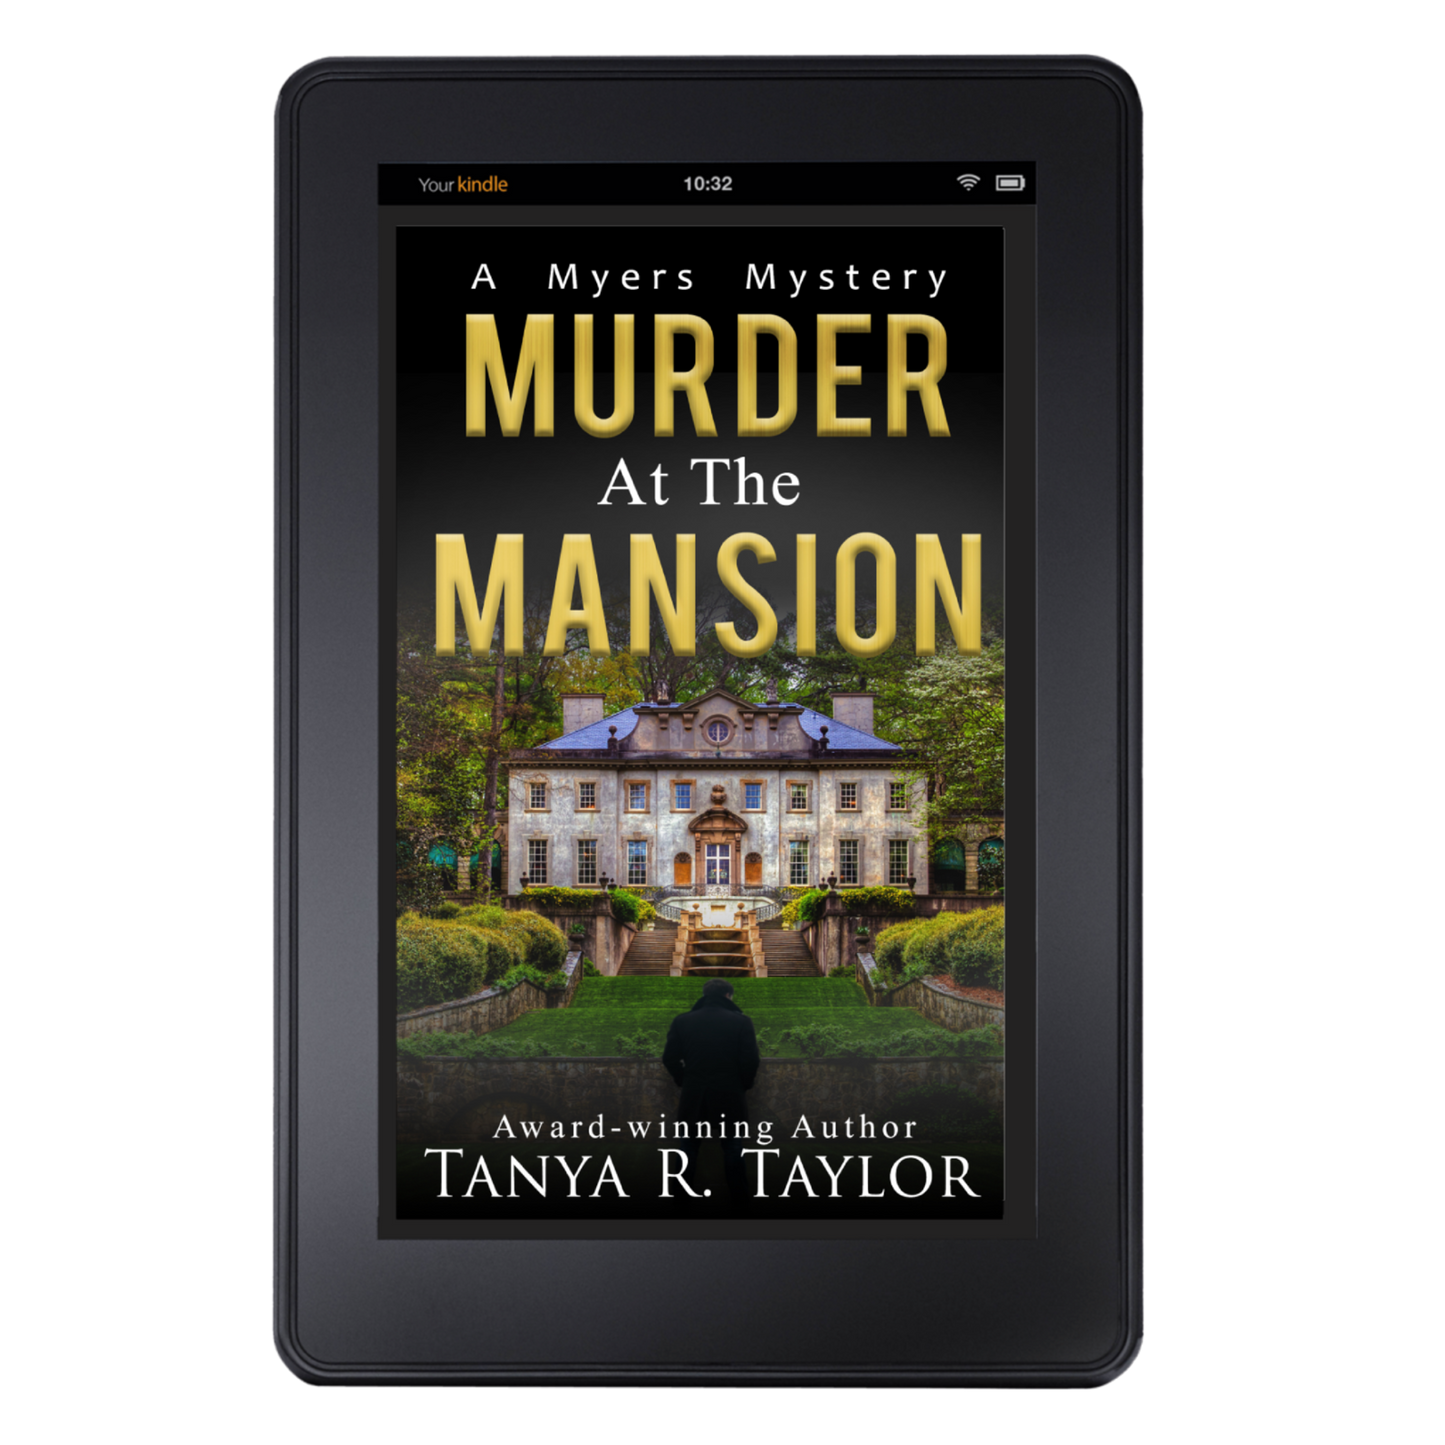 (Ebook) MURDER AT THE MANSION (The Myers Mysteries) Book 1